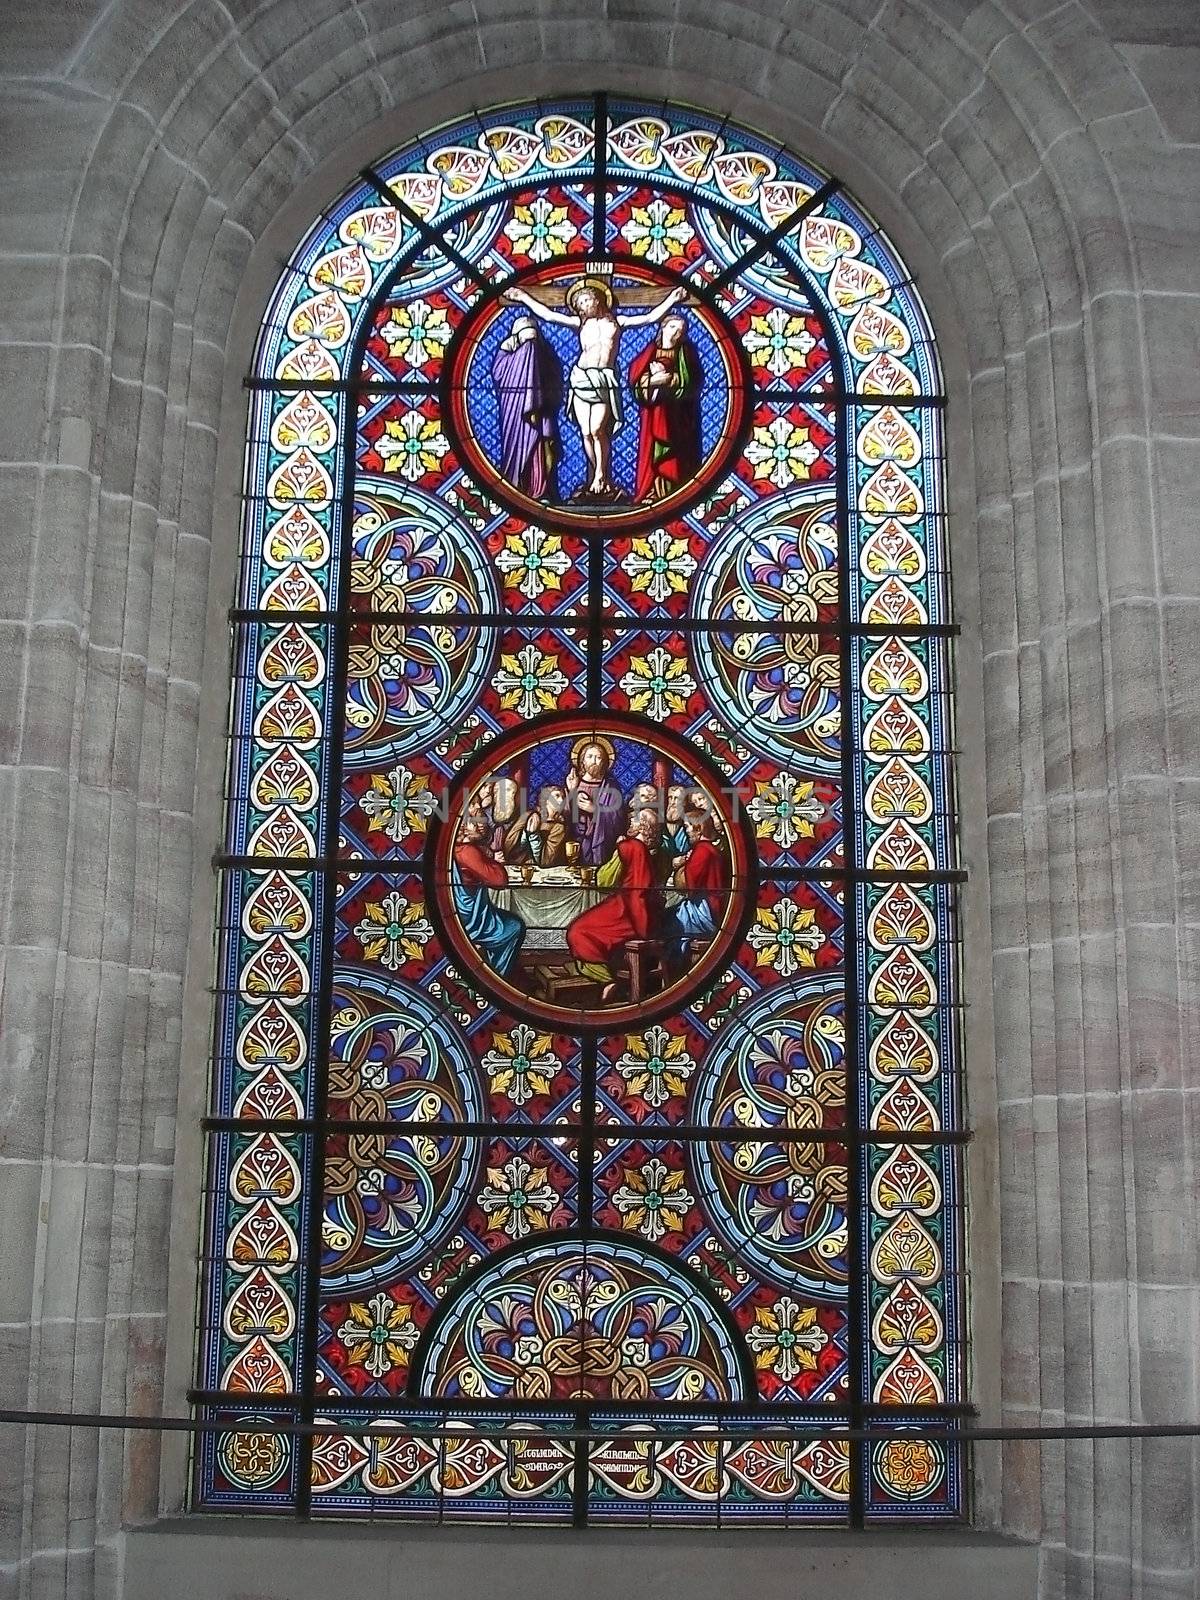 Stained Glass Window Depicting Biblical Scenes Taken At Munster Cathedral In Basel Switzerland.